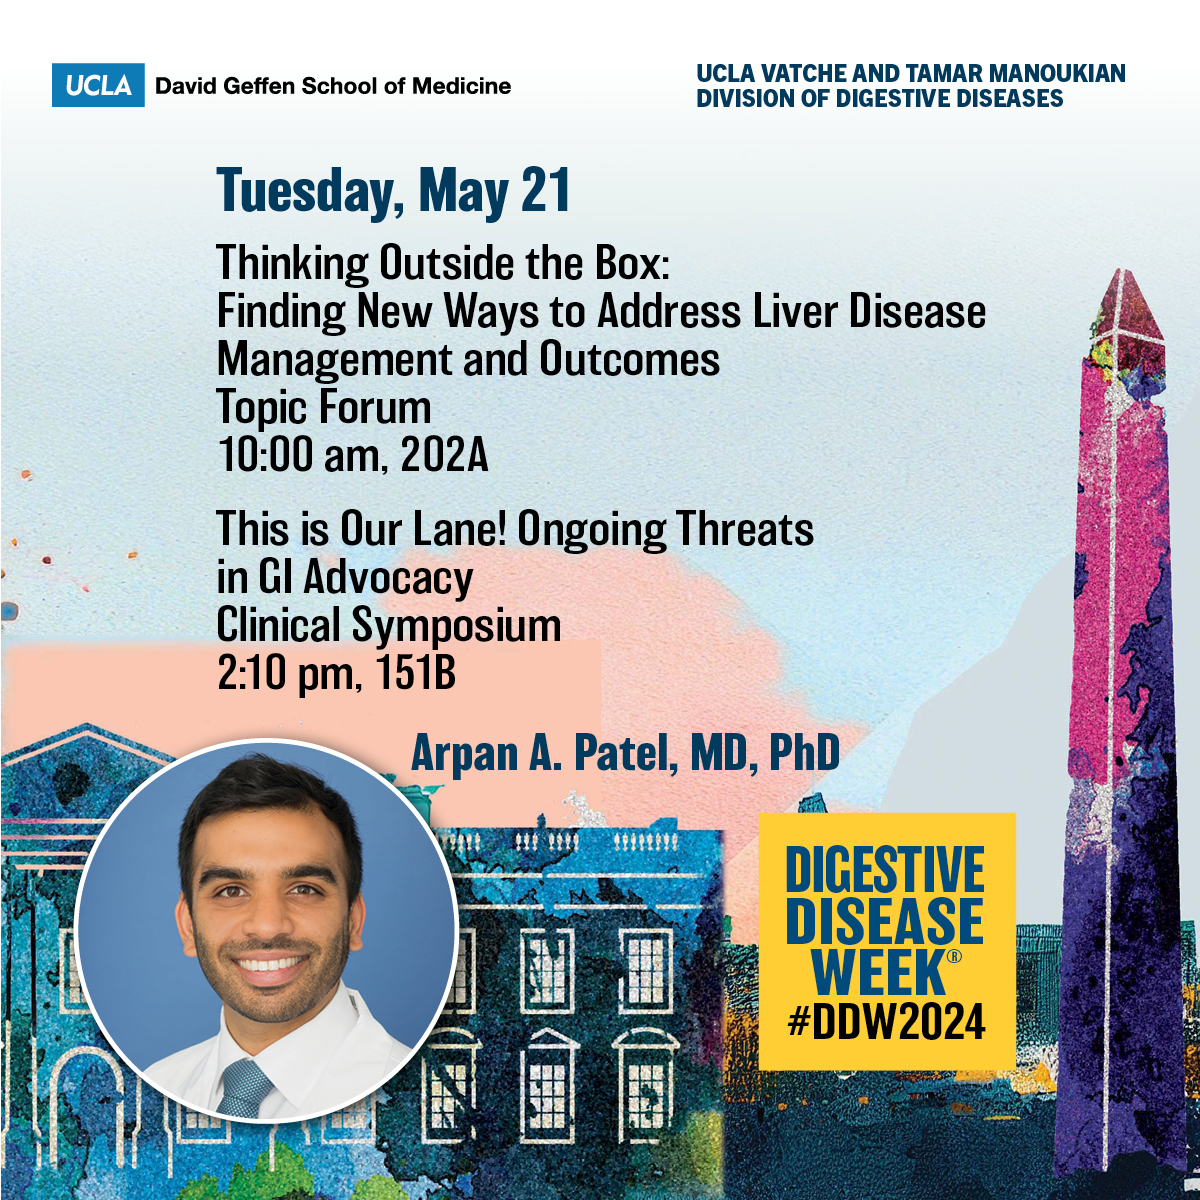 💥@ArpanPatelMD at #DDW2024 on Tuesday, May 21!

1⃣Finding New Ways to Address Liver Disease Management and Outcomes #LiverTwitter
🗓️10:00 am, 202A

2⃣Ongoing Threats in GI Advocacy
🗓️2:10 pm, 151B